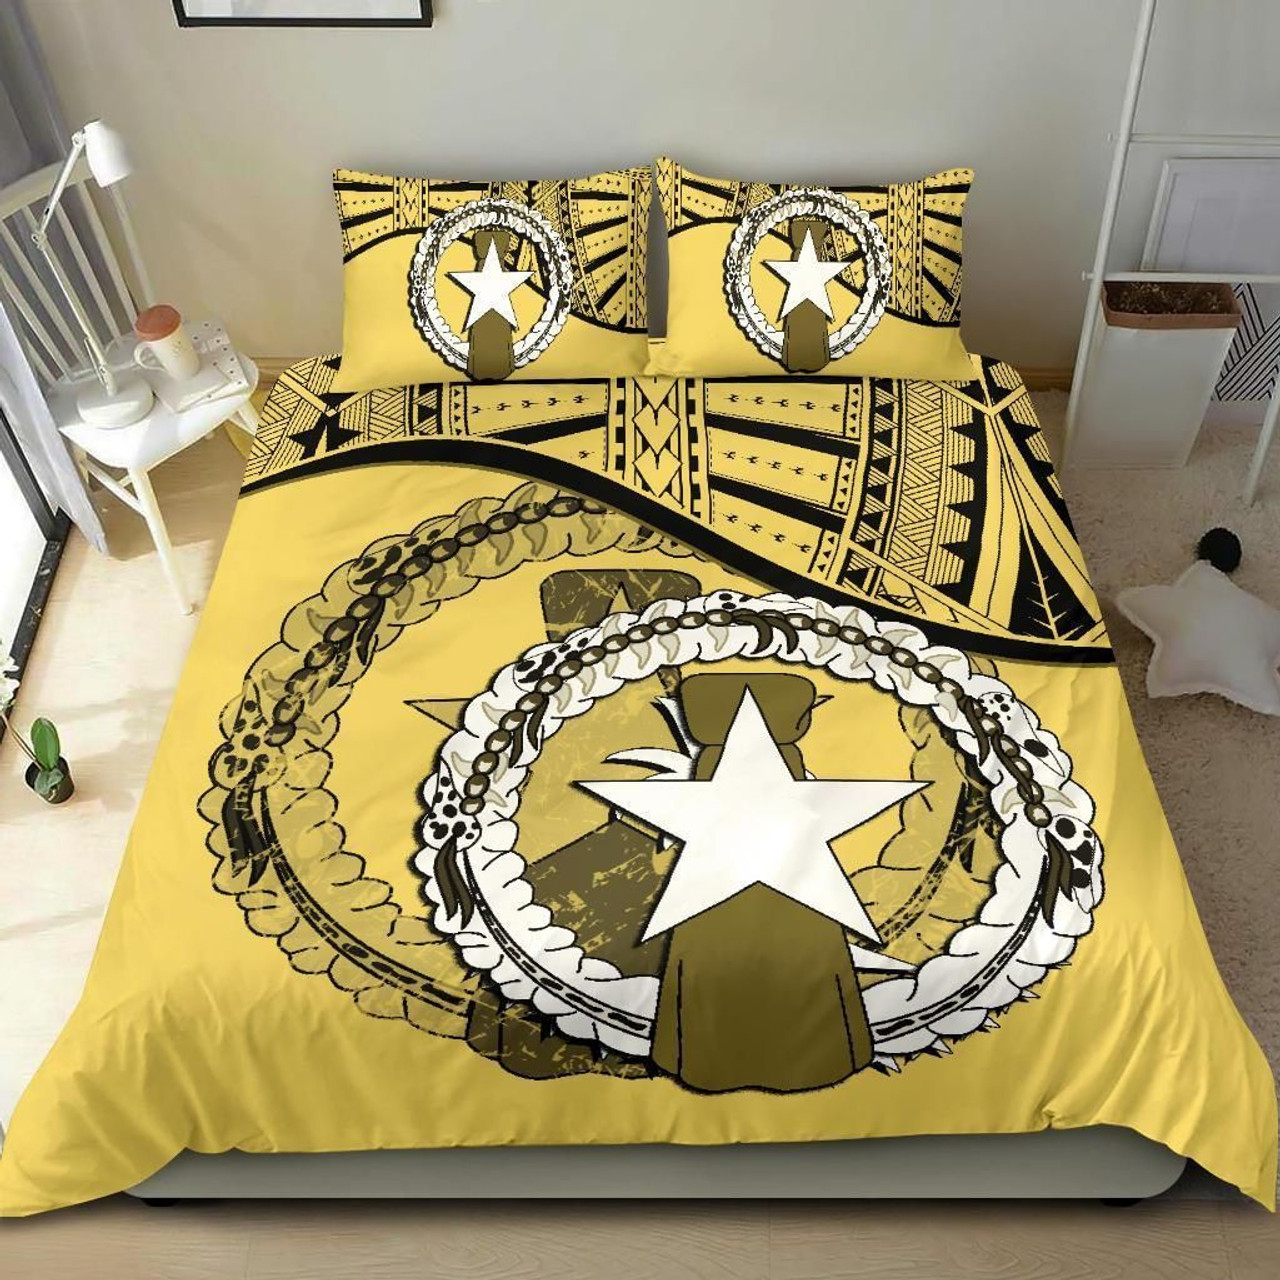 Cook Islands Polynesian Custom Personalised Bedding Set - Floral With Seal Flag Color 4